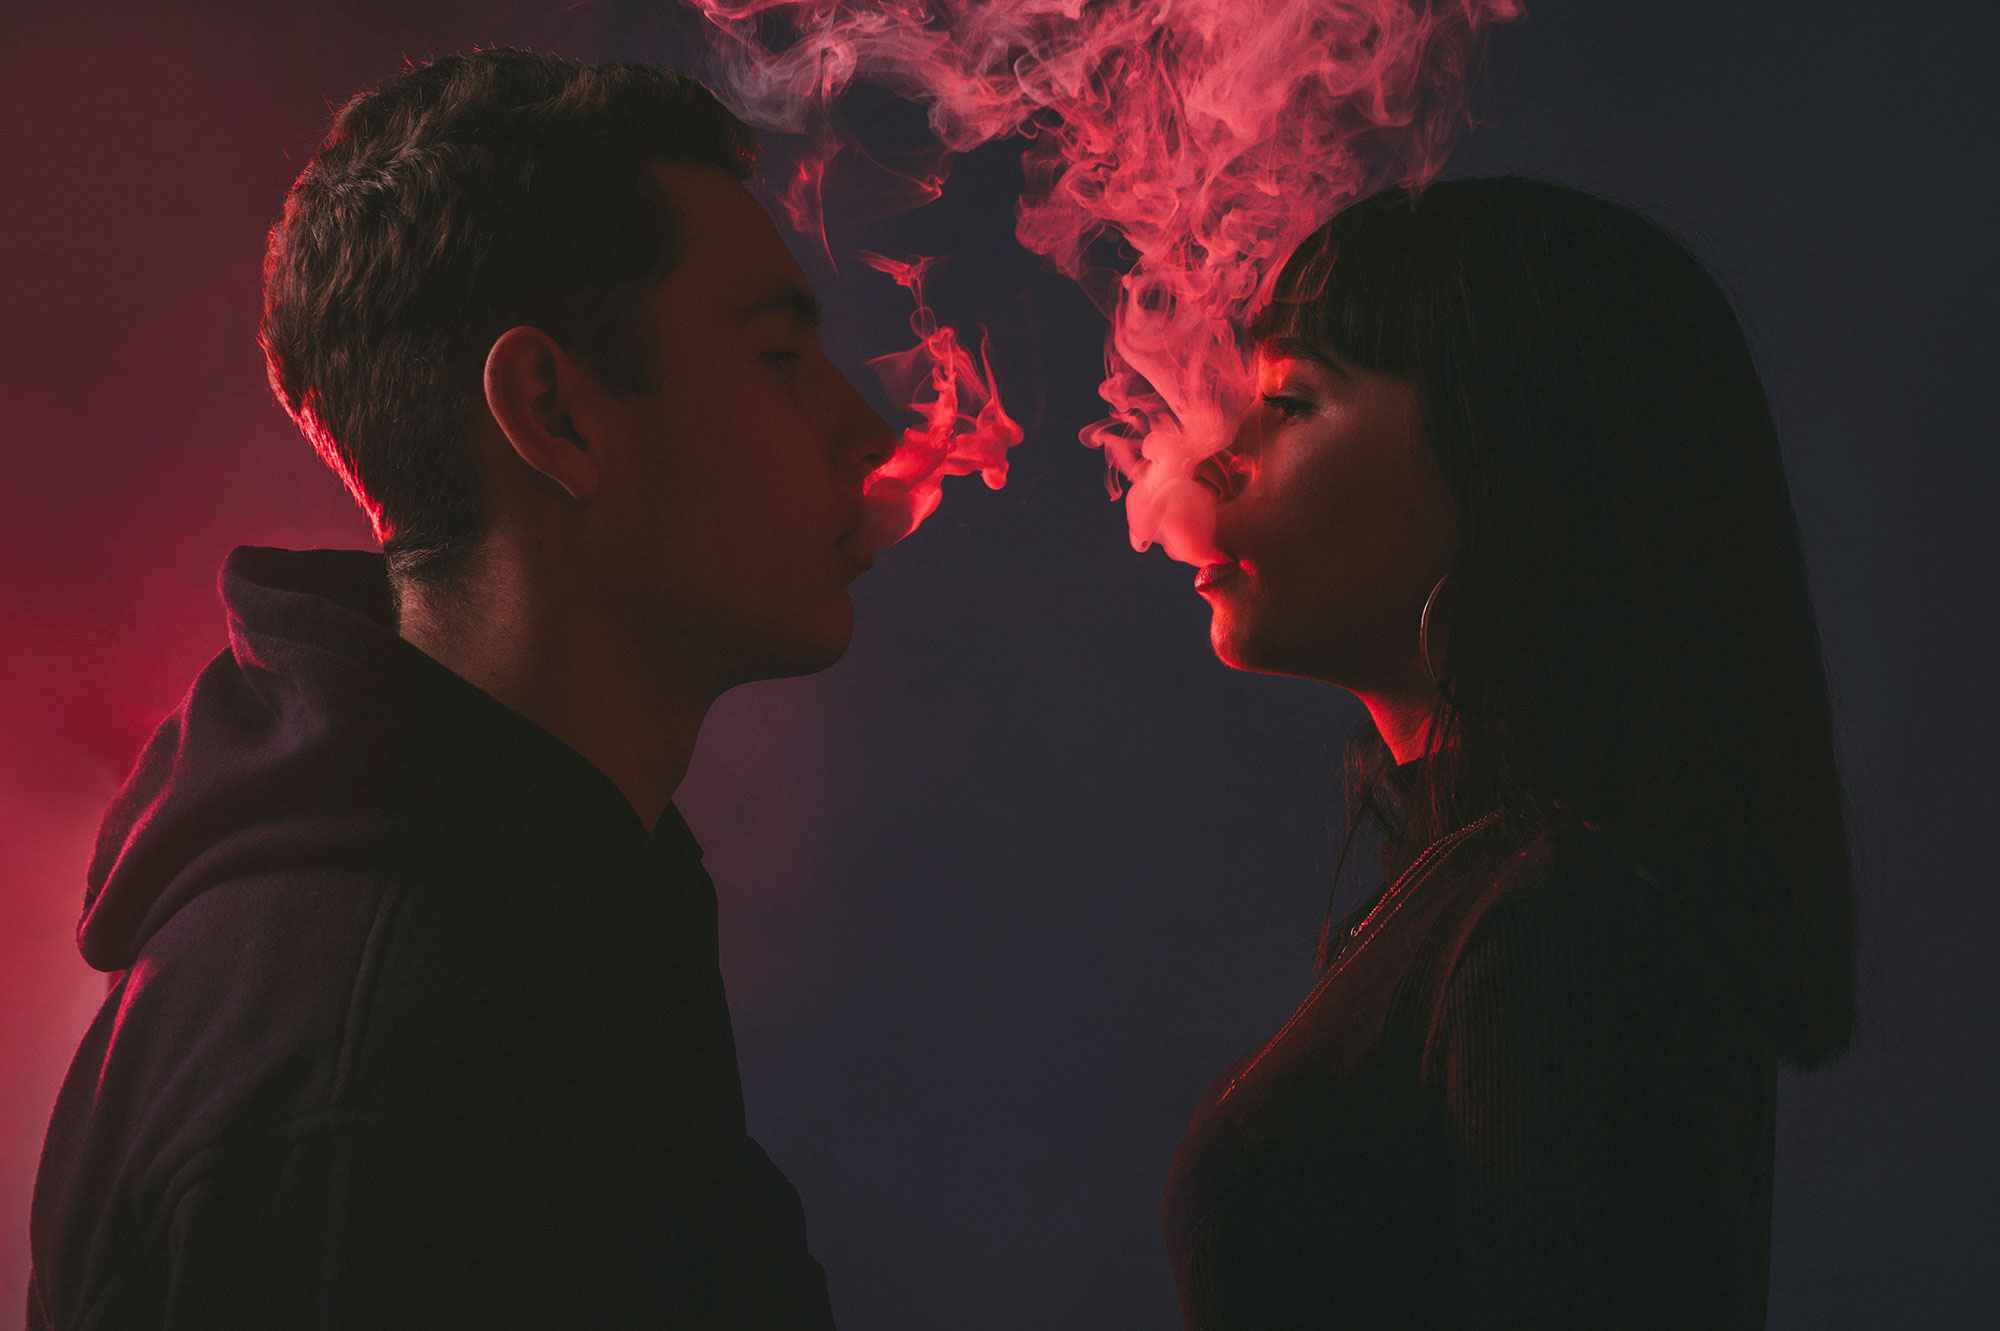 vaping-boy-and-girl-together-neon